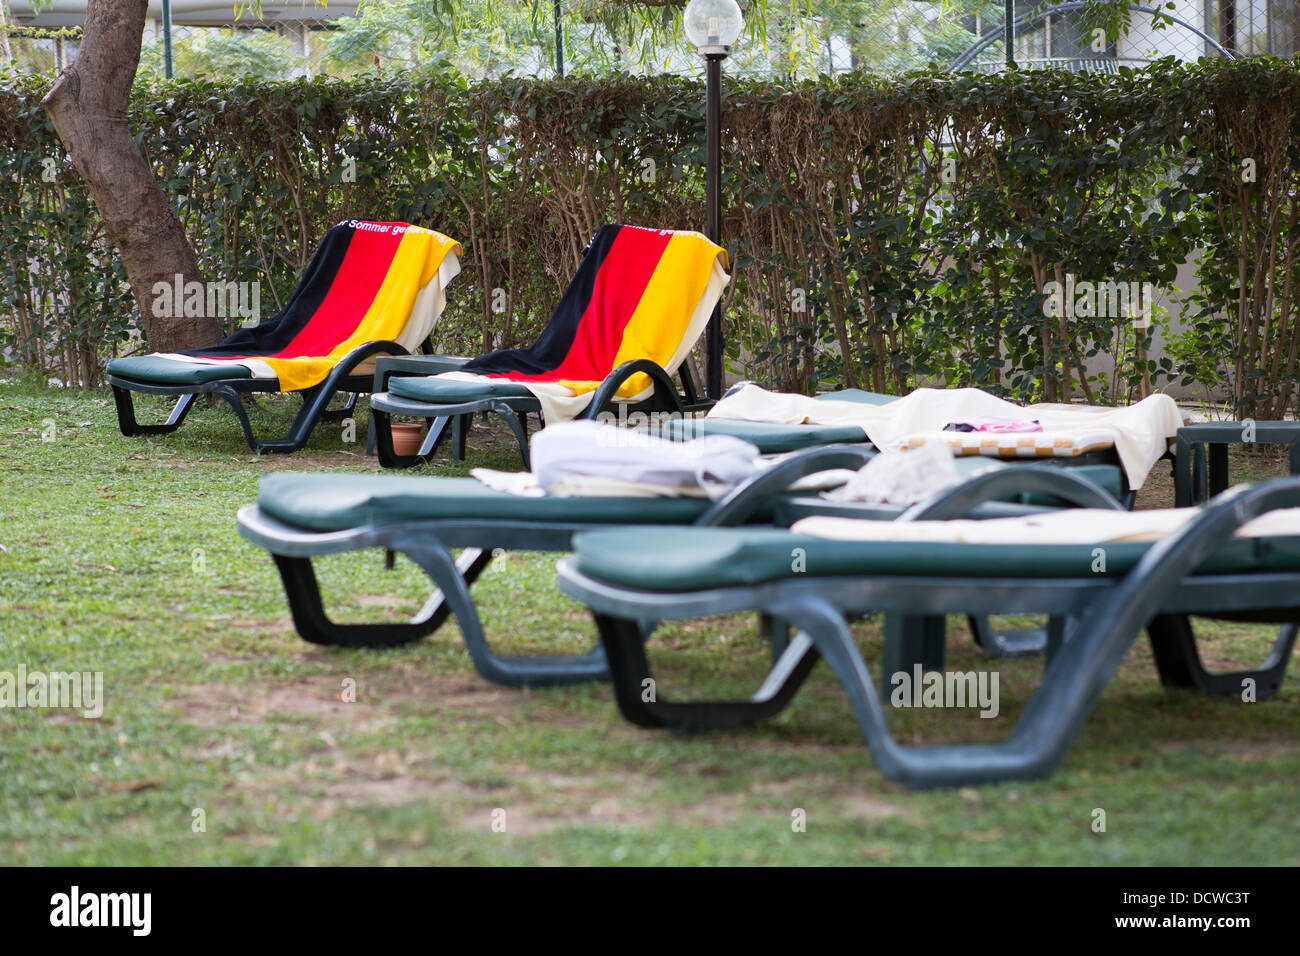 towels-in-the-colours-of-the-german-flag-are-used-to-reserve-sun-loungers-DCWC3T.jpg